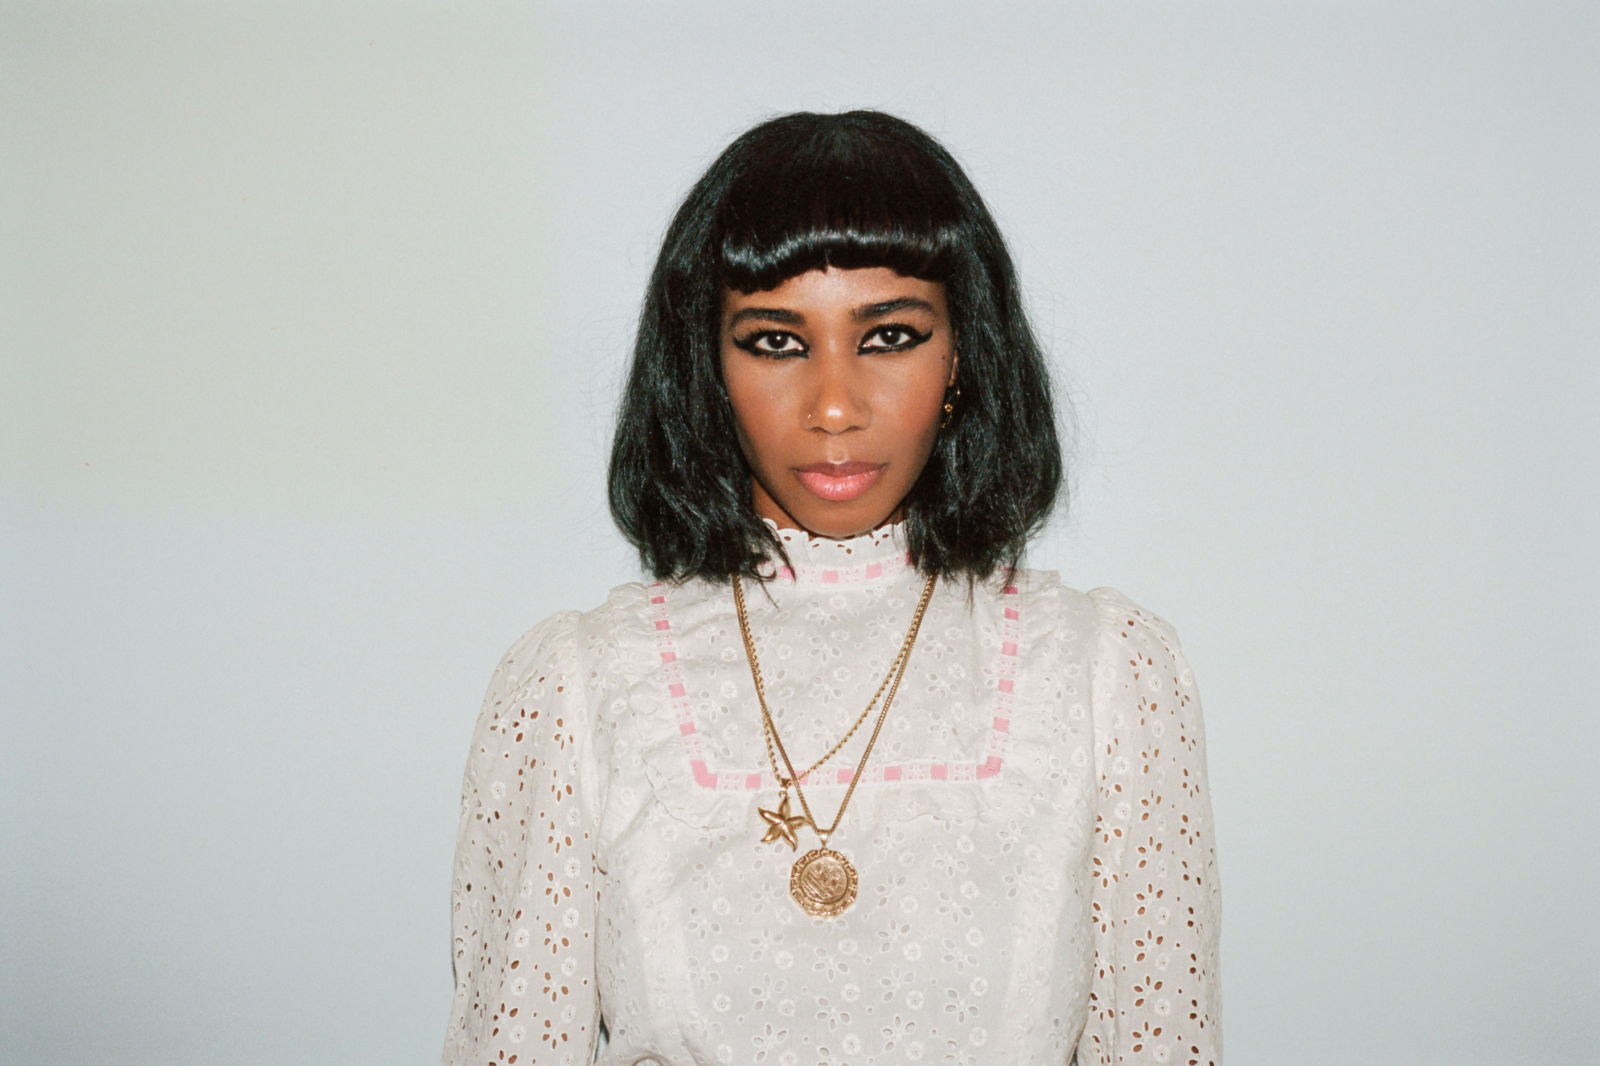 Santigold releases surprise mixtape 'I Don’t Want: The Gold Fire Sessions'